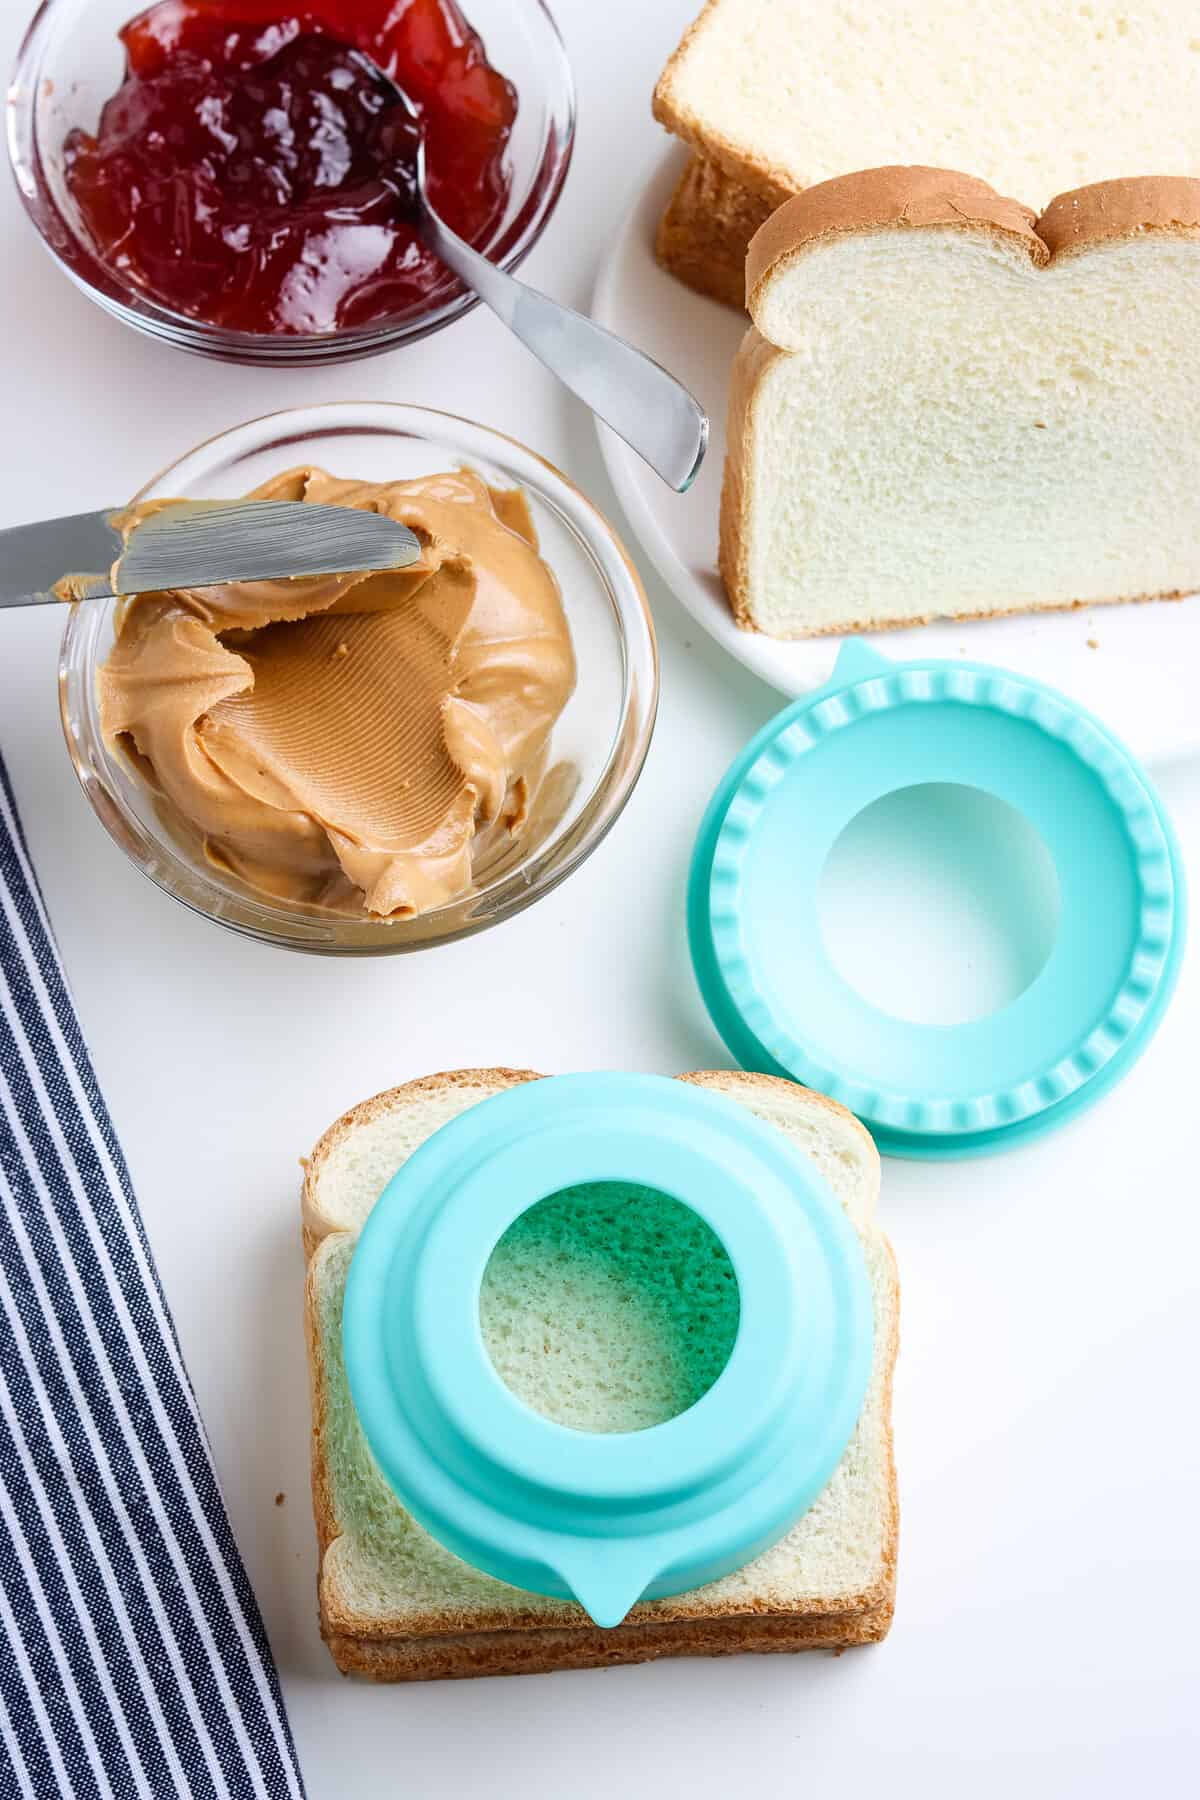 Add the top Slice of Bread and cut circle with Sandwich Cutter